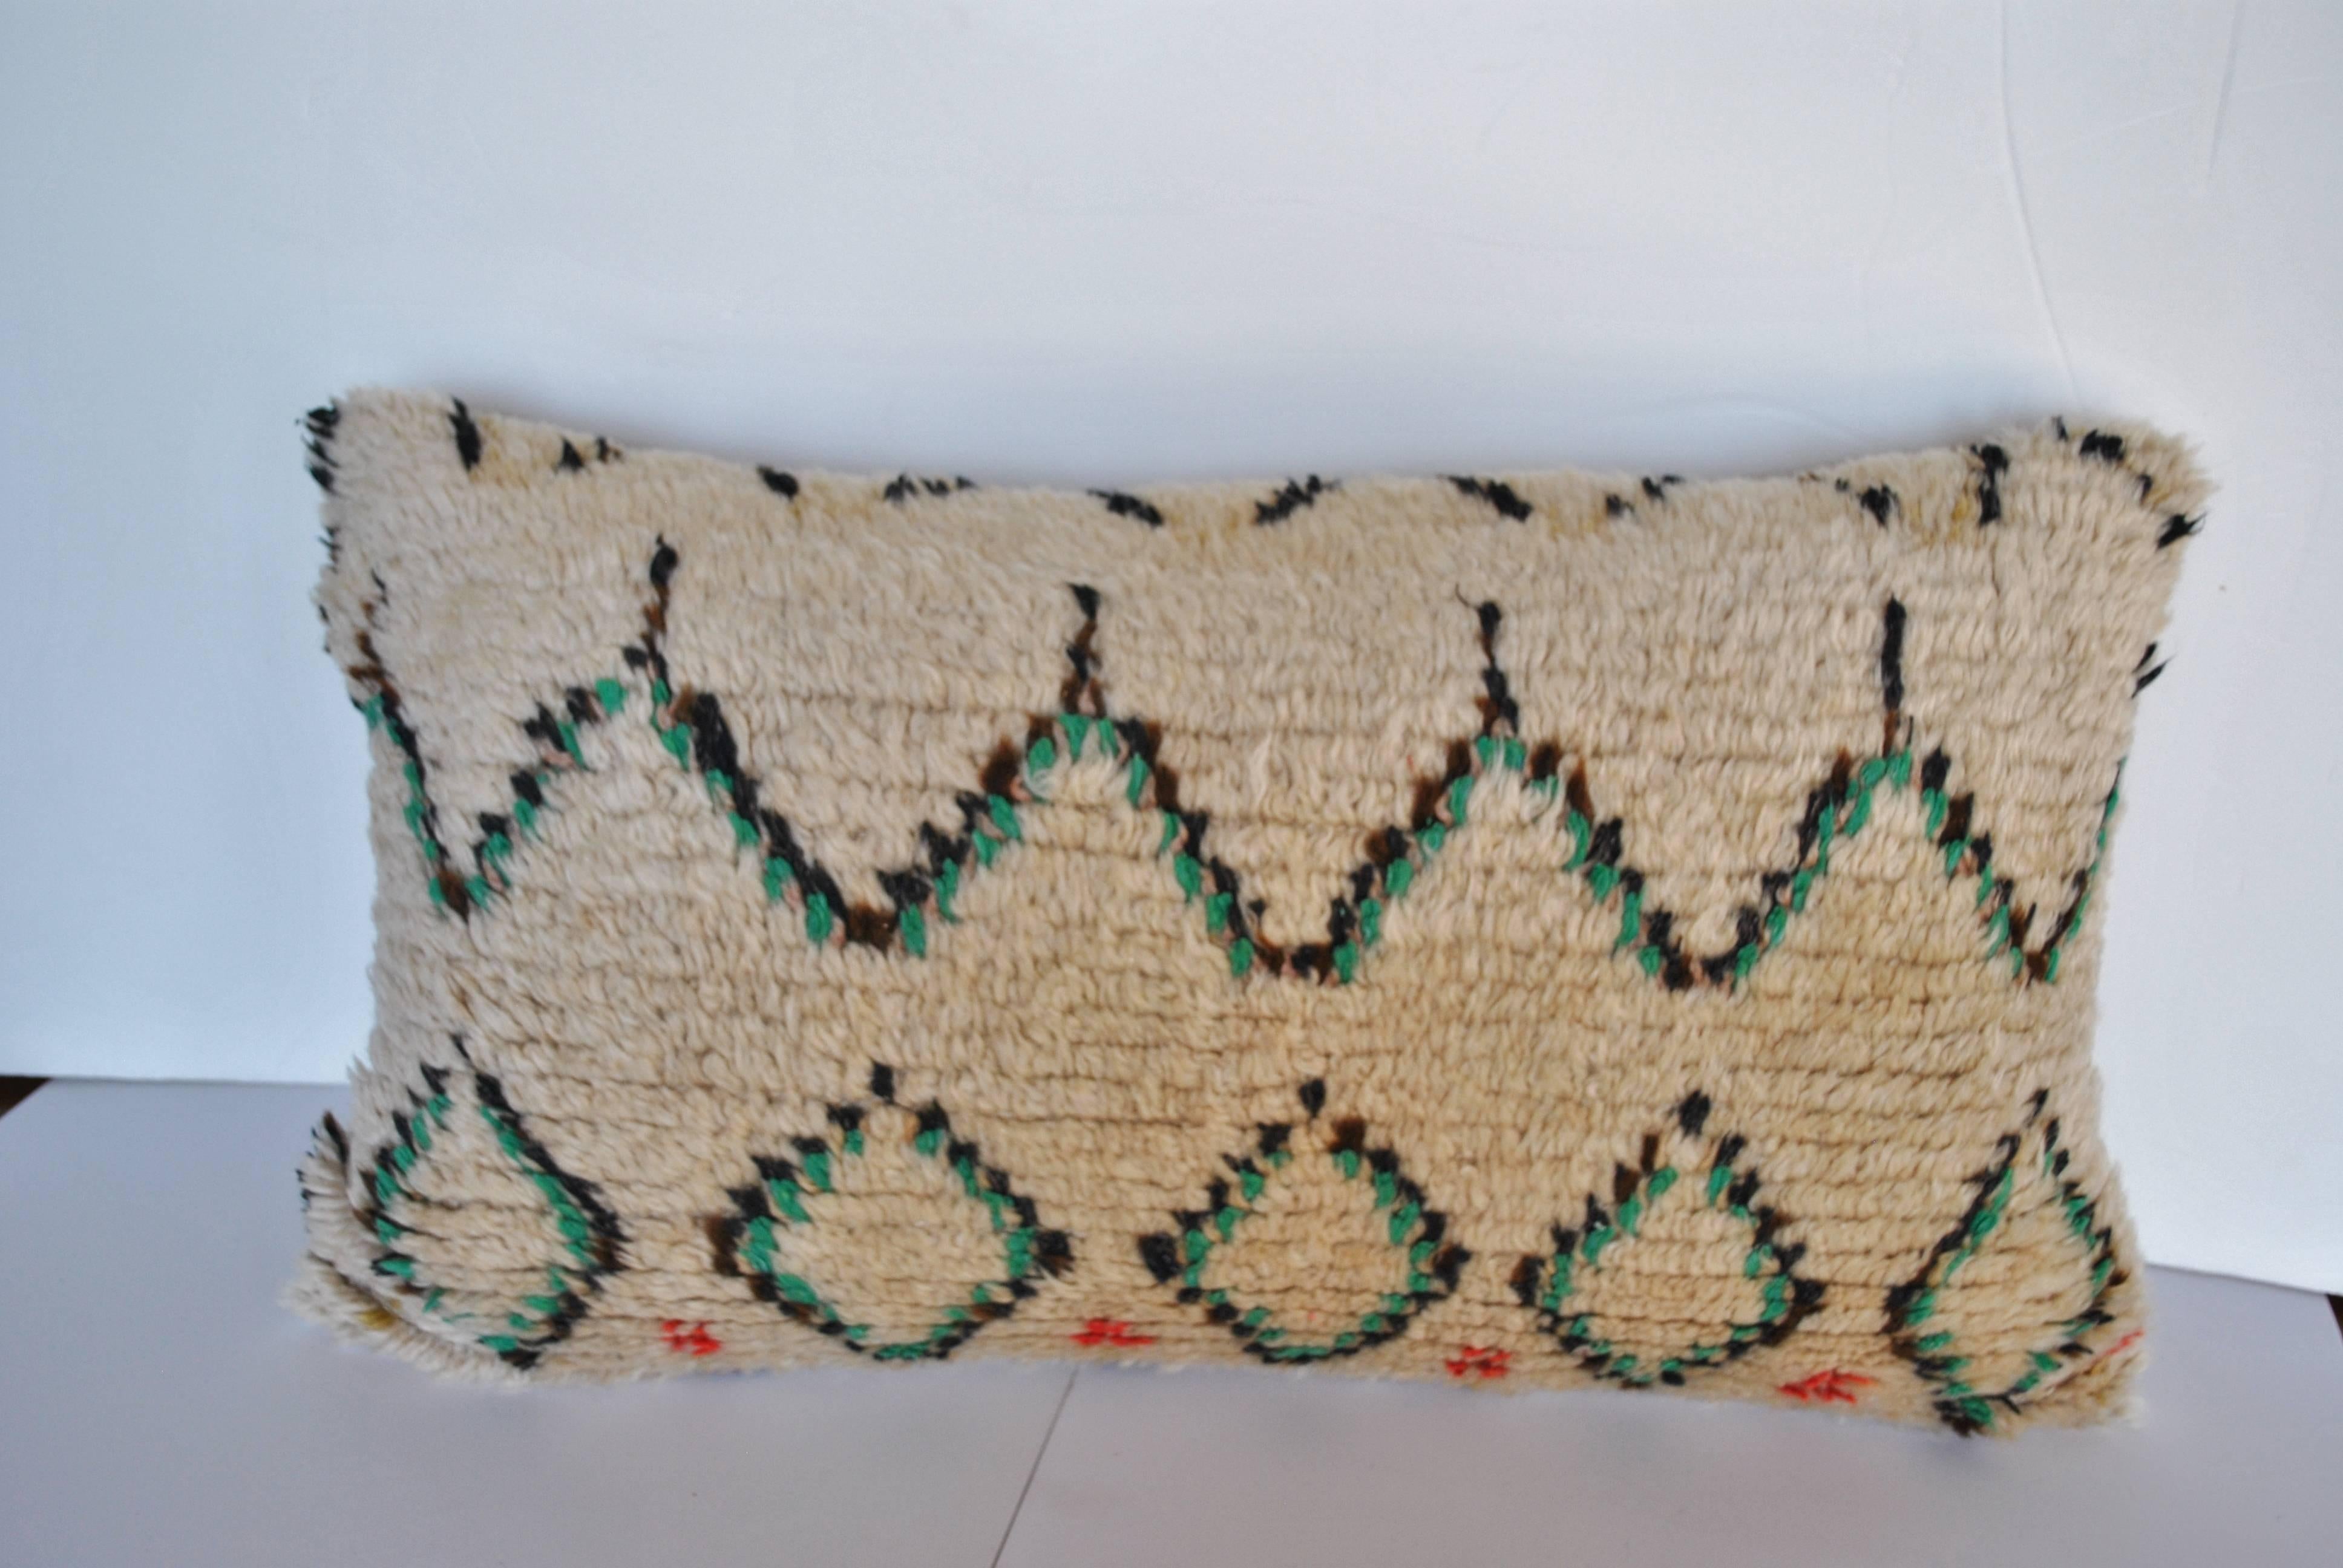 Custom pillow cut from a vintage hand loomed wool Moroccan Azilal rug from the Atlas Mountains. Wool textile is soft and lustrous with tribal designs in natural dyes. Pillow is backed in a soft beige mohair, filled with an insert of 50/50 down and